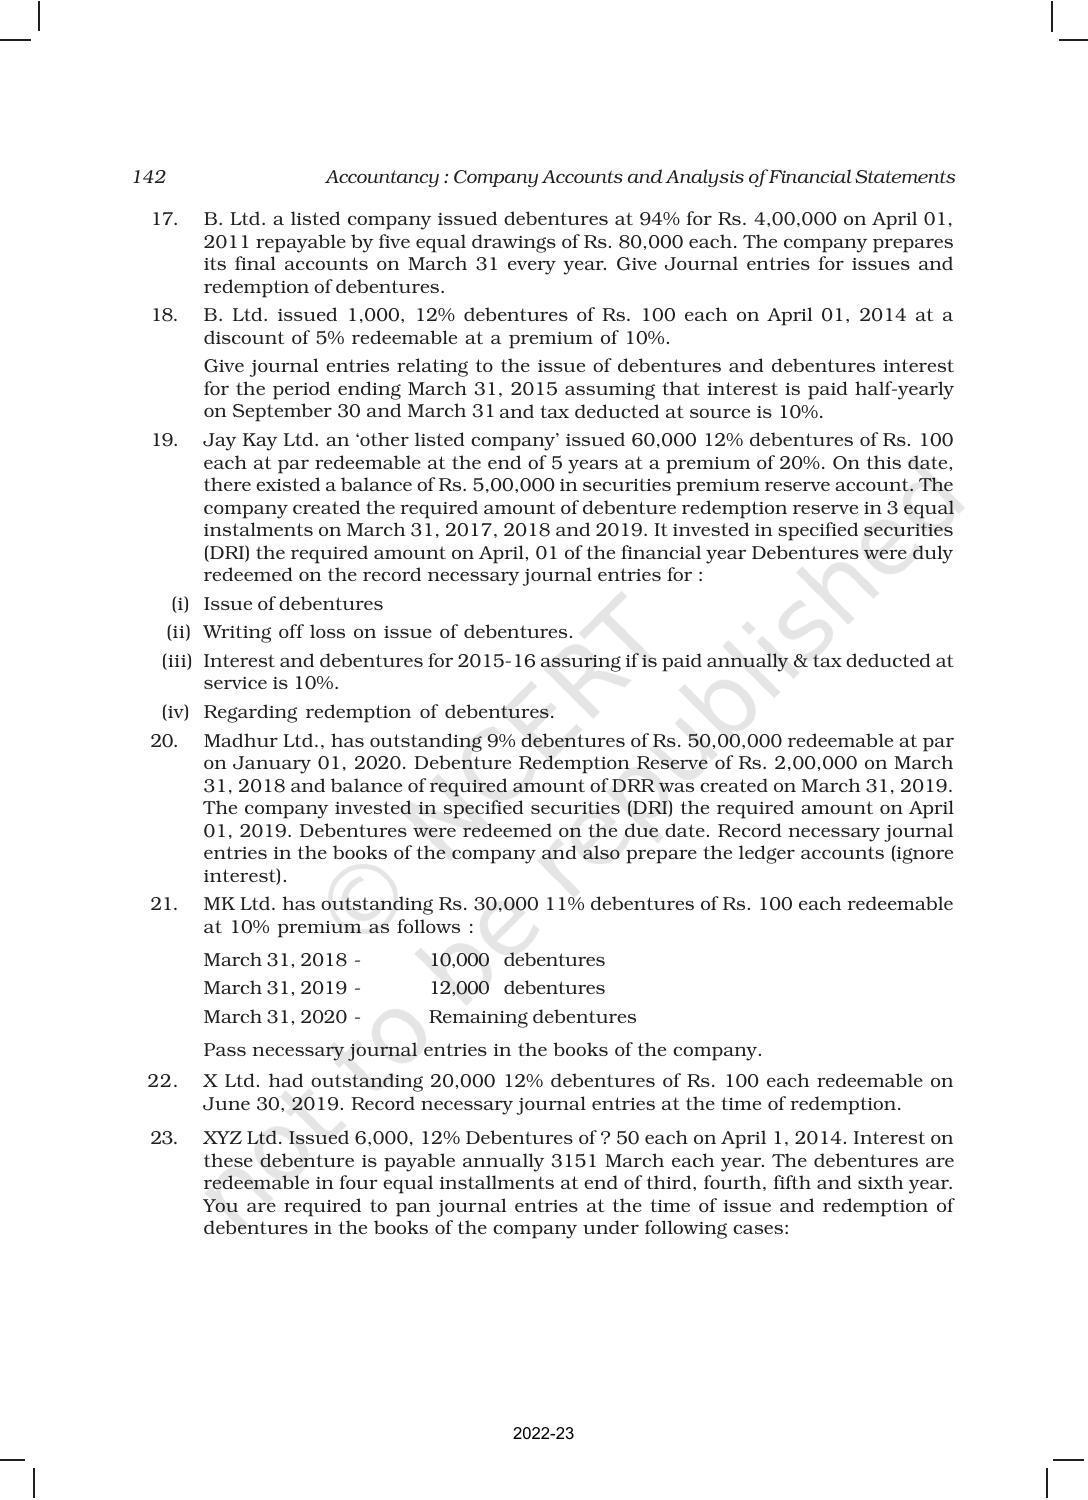 NCERT Book for Class 12 Accountancy Part II Chapter 1 Issue and Redemption of Debentures - Page 68